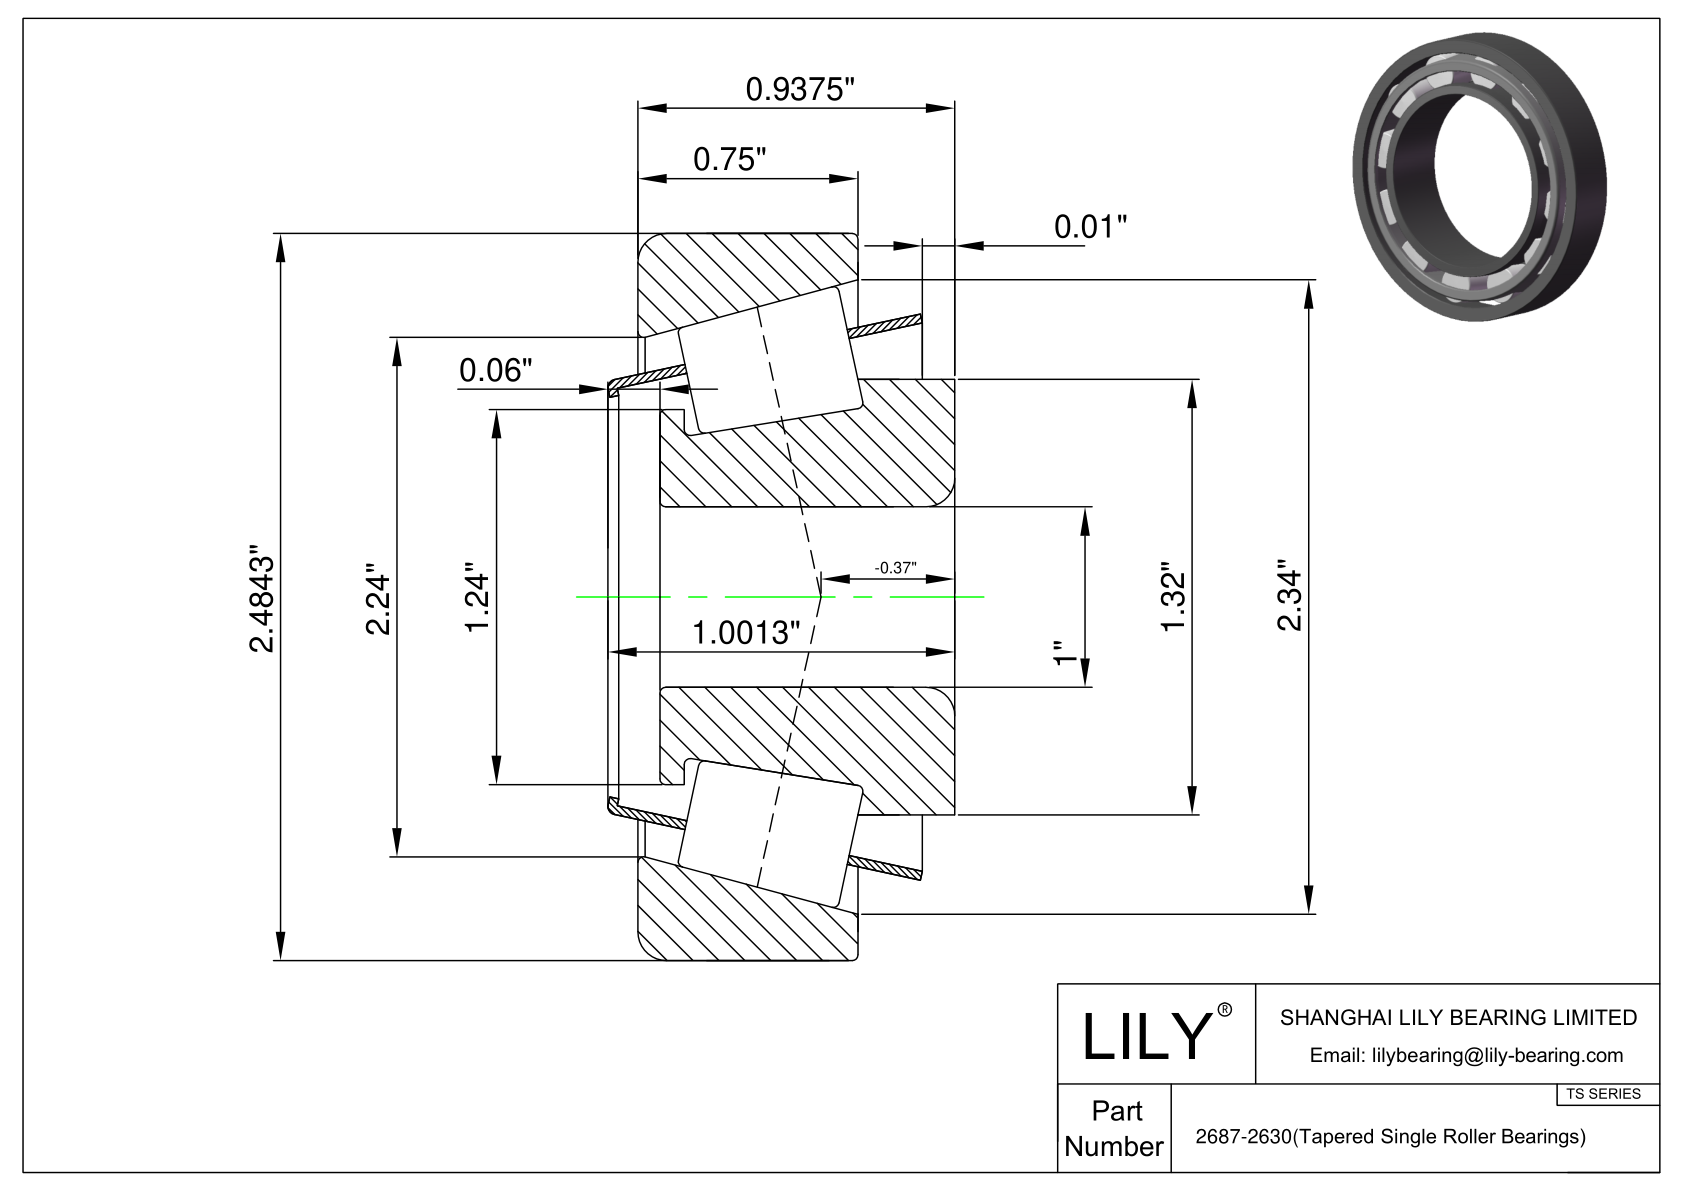 2687-2630 TS (Tapered Single Roller Bearings) (Imperial) cad drawing